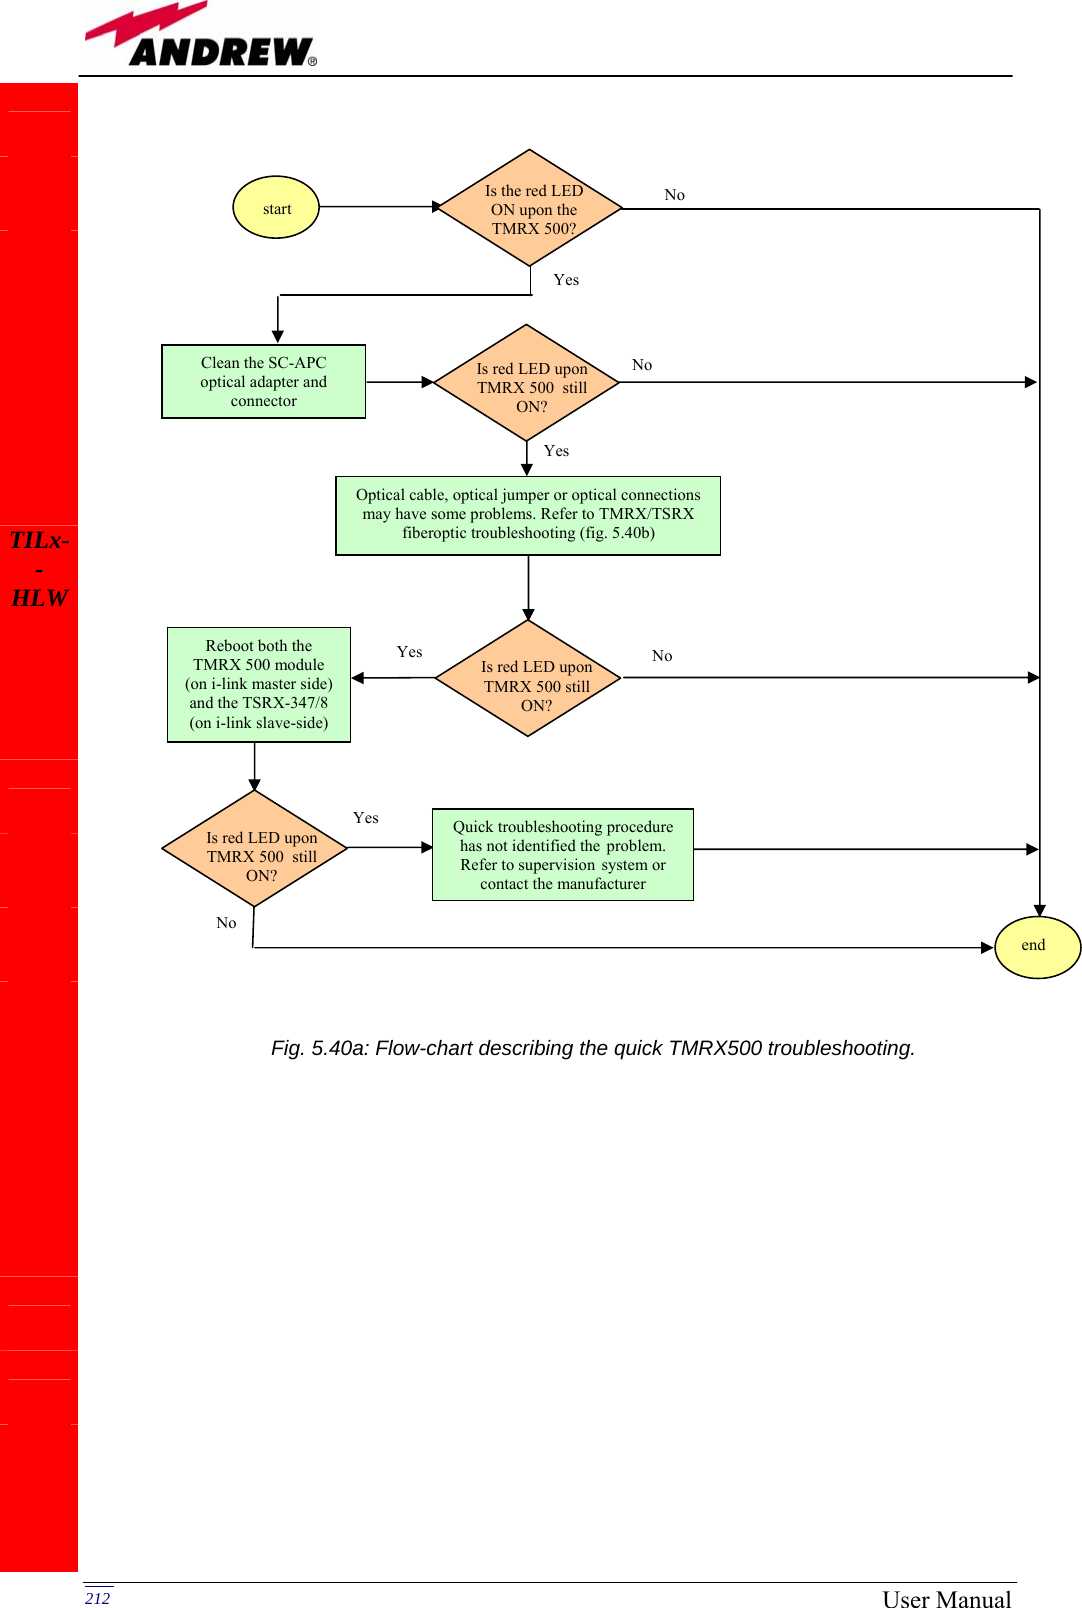   212  User Manual                                                            TILx- -HLW              Fig. 5.40a: Flow-chart describing the quick TMRX500 troubleshooting. start Is the red LED ON upon the TMRX 500? Yes No Clean the SC-APC optical adapter and connector No Yes end Is red LED upon TMRX 500  still ON?Optical cable, optical jumper or optical connections may have some problems. Refer to TMRX/TSRX fiberoptic troubleshooting (fig. 5.40b) Yes  Is red LED upon TMRX 500 still ON?No Reboot both the  TMRX 500 module  (on i-link master side) and the TSRX-347/8 (on i-link slave-side) Is red LED upon TMRX 500  still ON? Quick troubleshooting procedure has not identified the problem. Refer to supervision system or contact the manufacturerYes No 